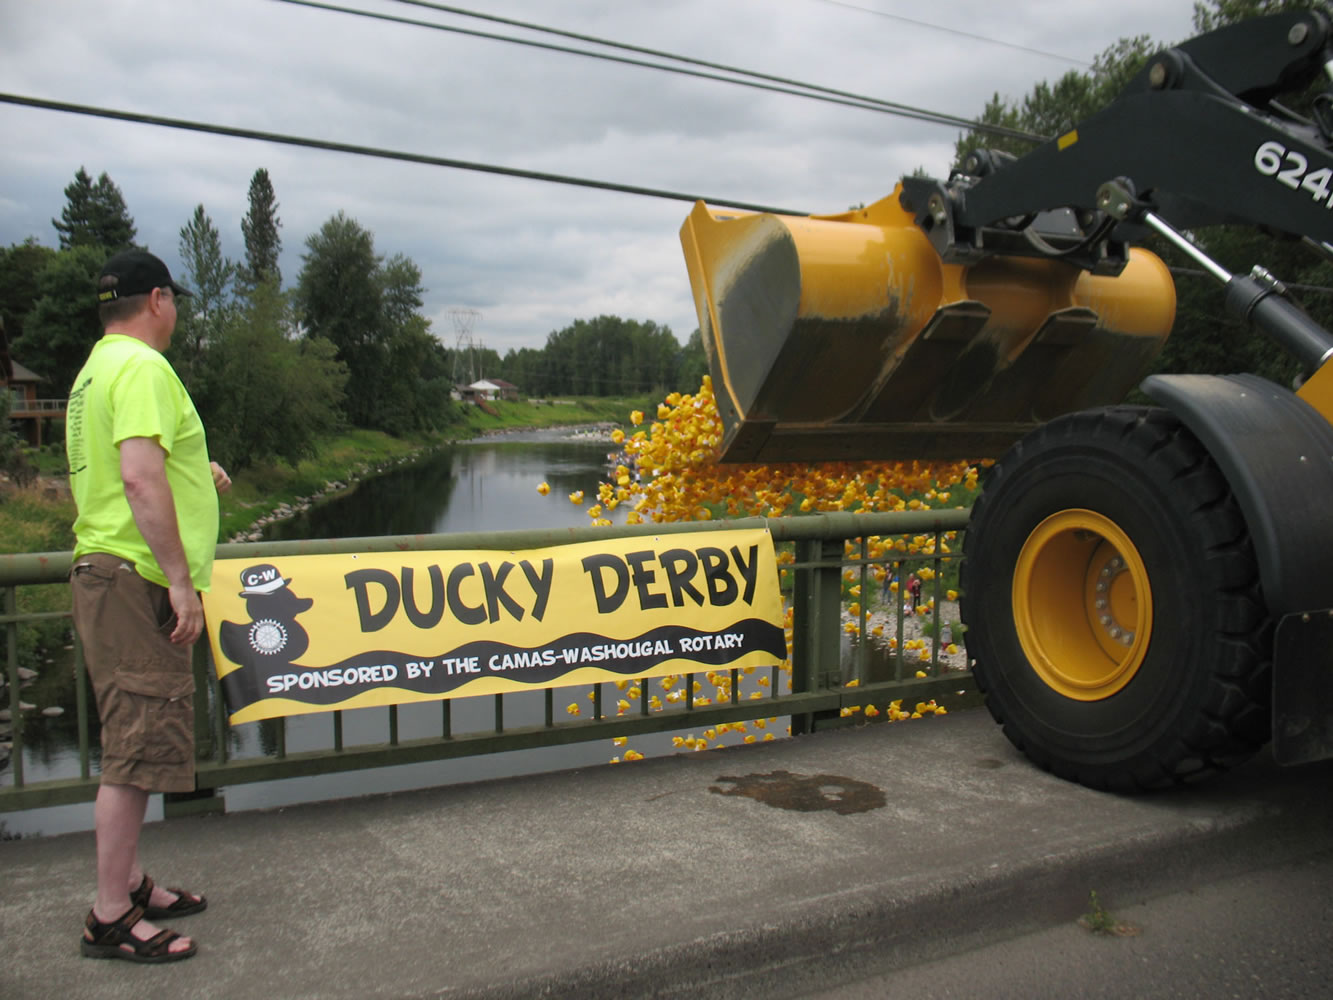 Camas-Washougal: That's a lot of ducks!